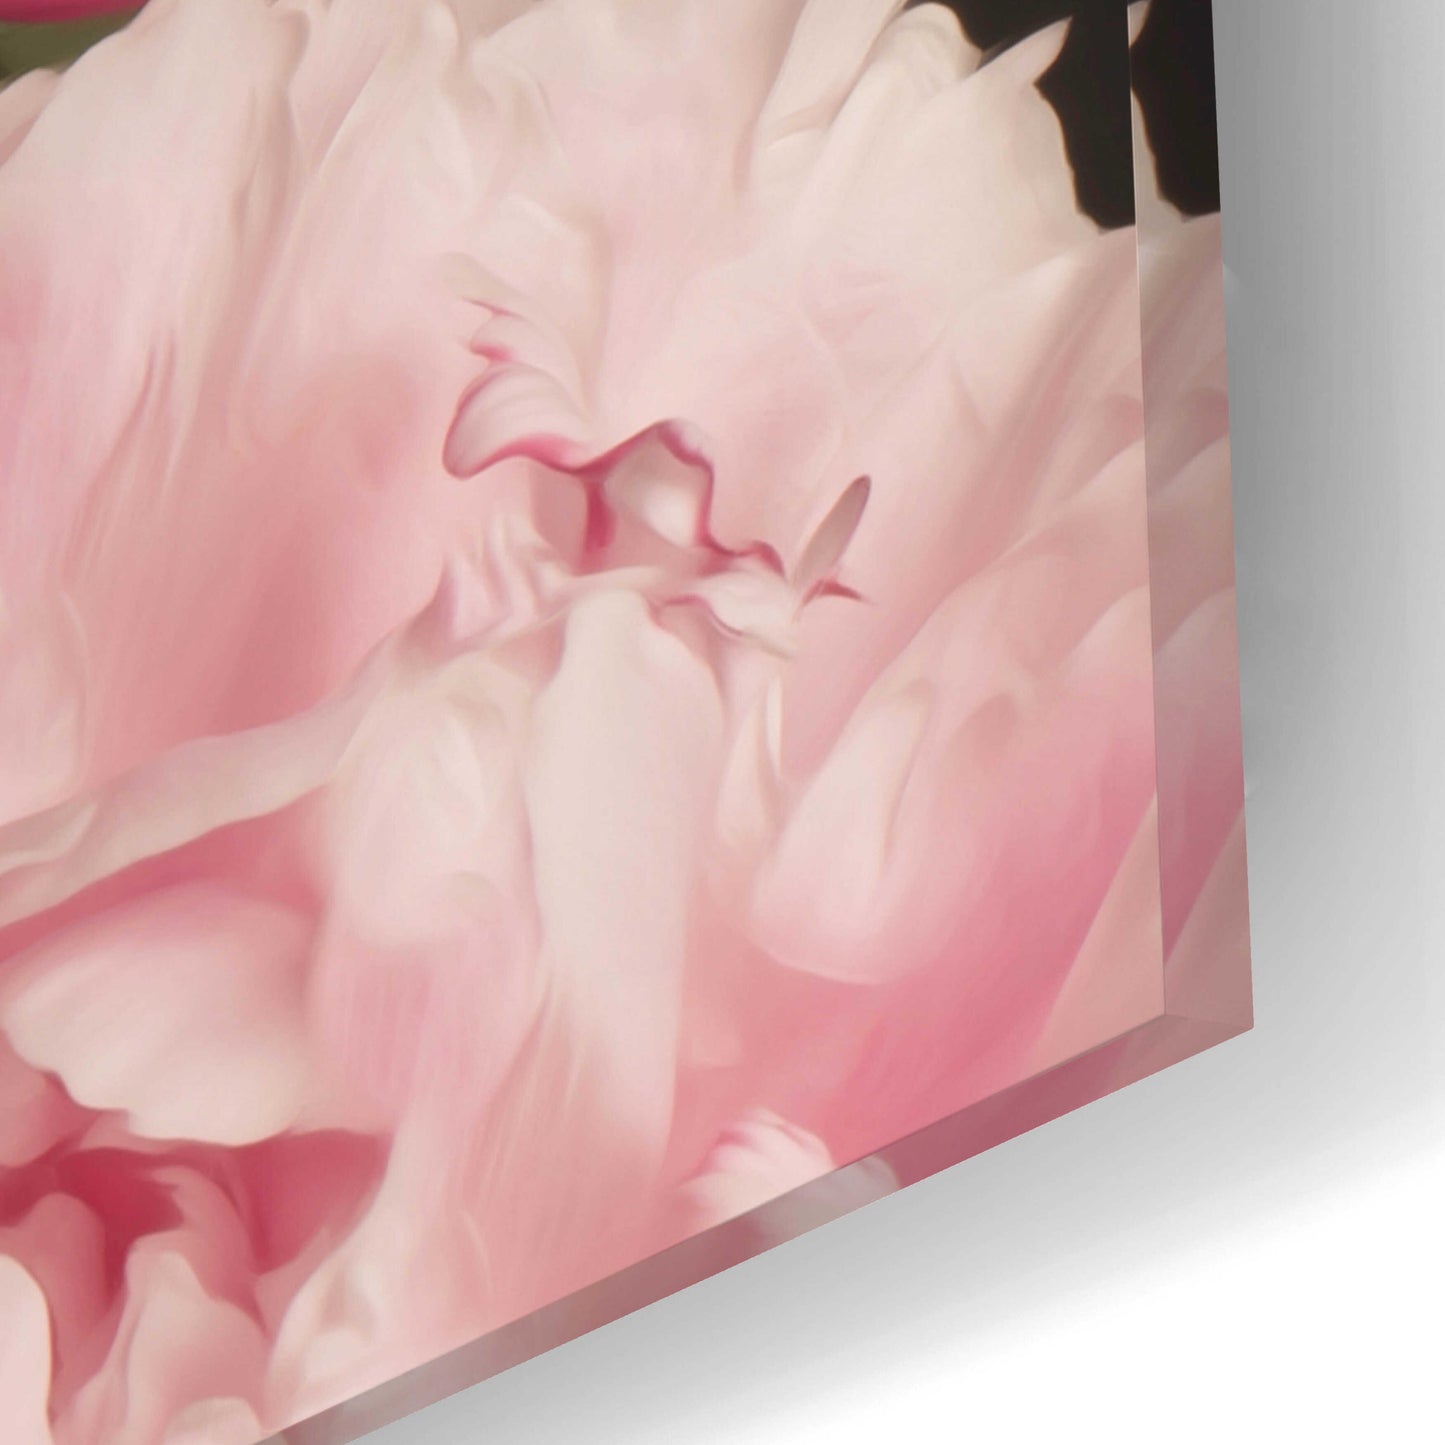 Epic Art 'Pink Petals' by Leah McLean, Acrylic Glass Wall Art,24x16